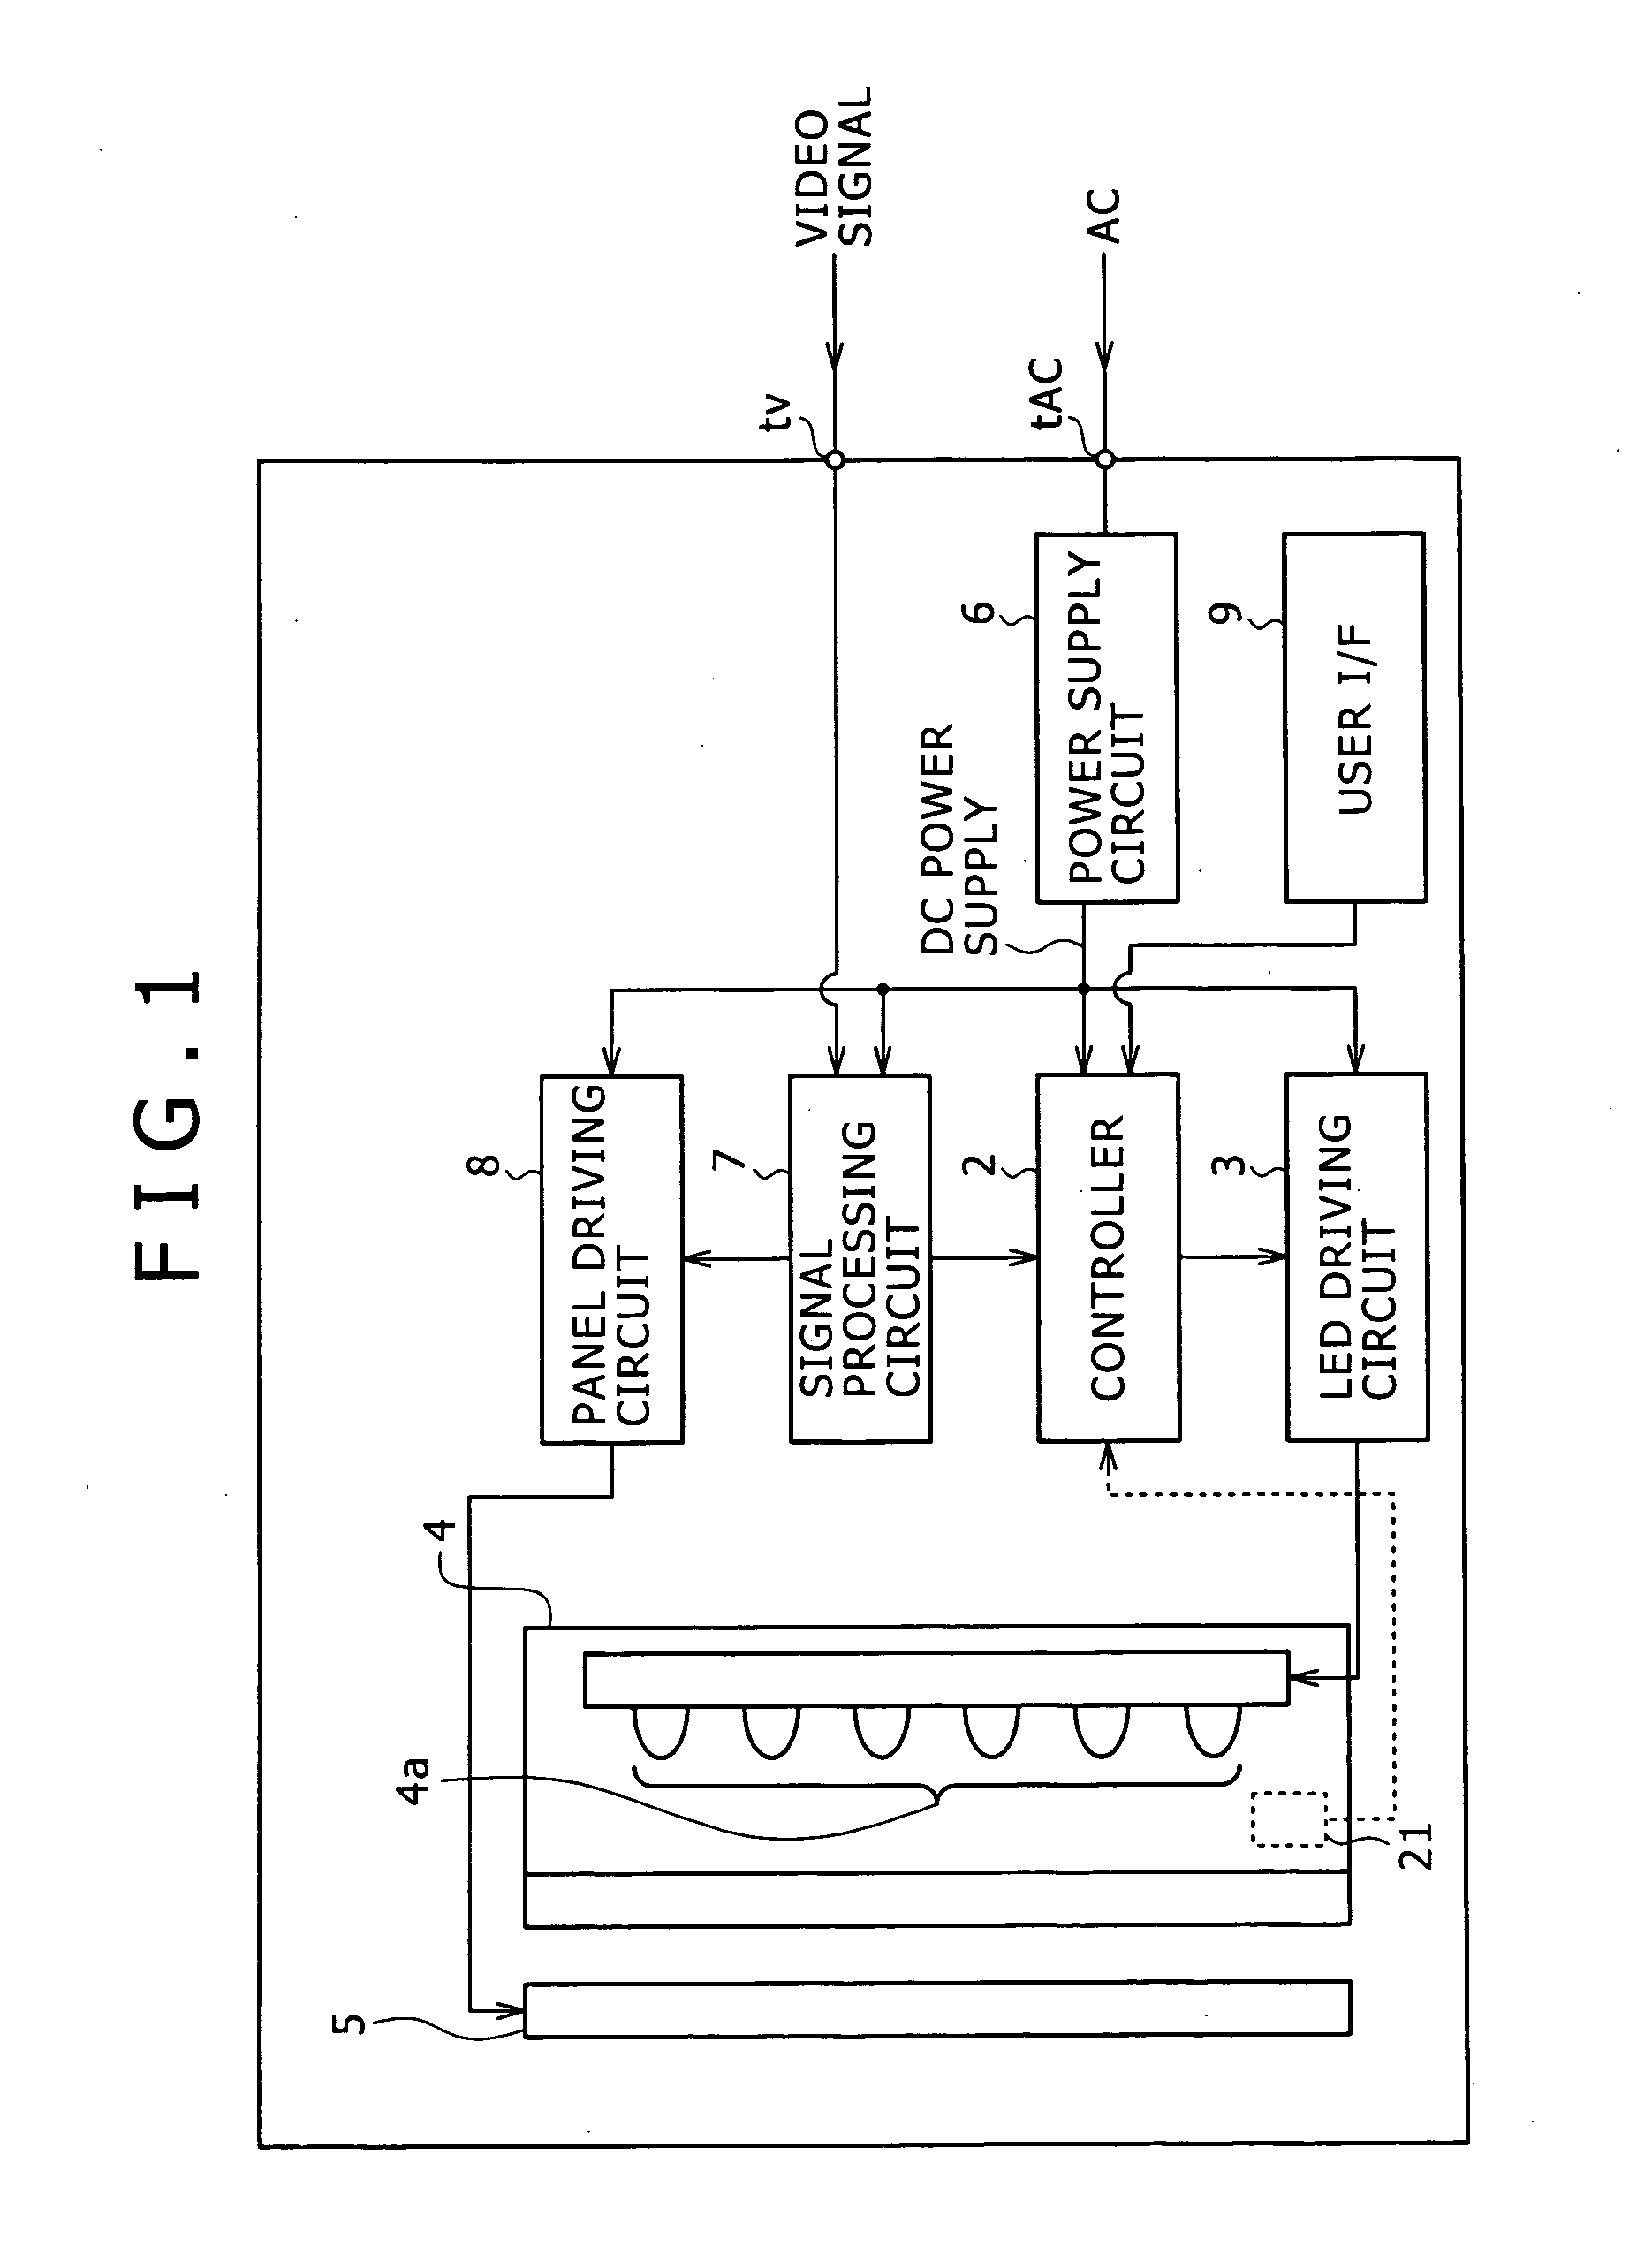 LED driving apparatus and method of controlling luminous power